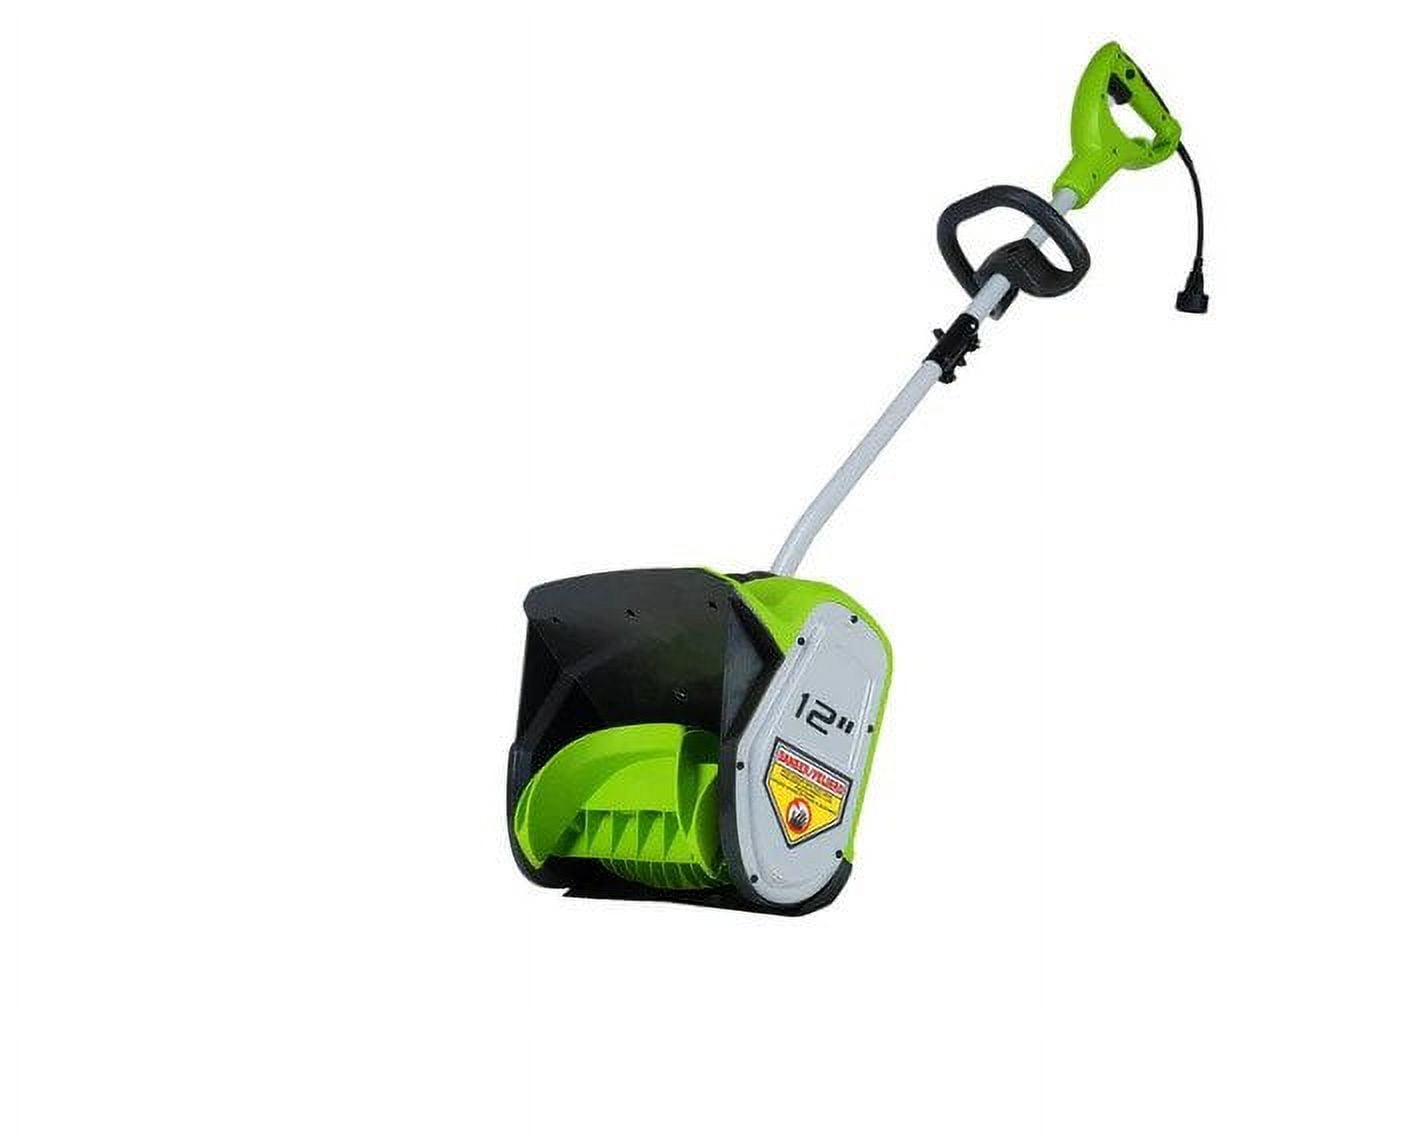 Greenworks 8-Amp 12" Corded Snow Shovel $37 + Free Shipping